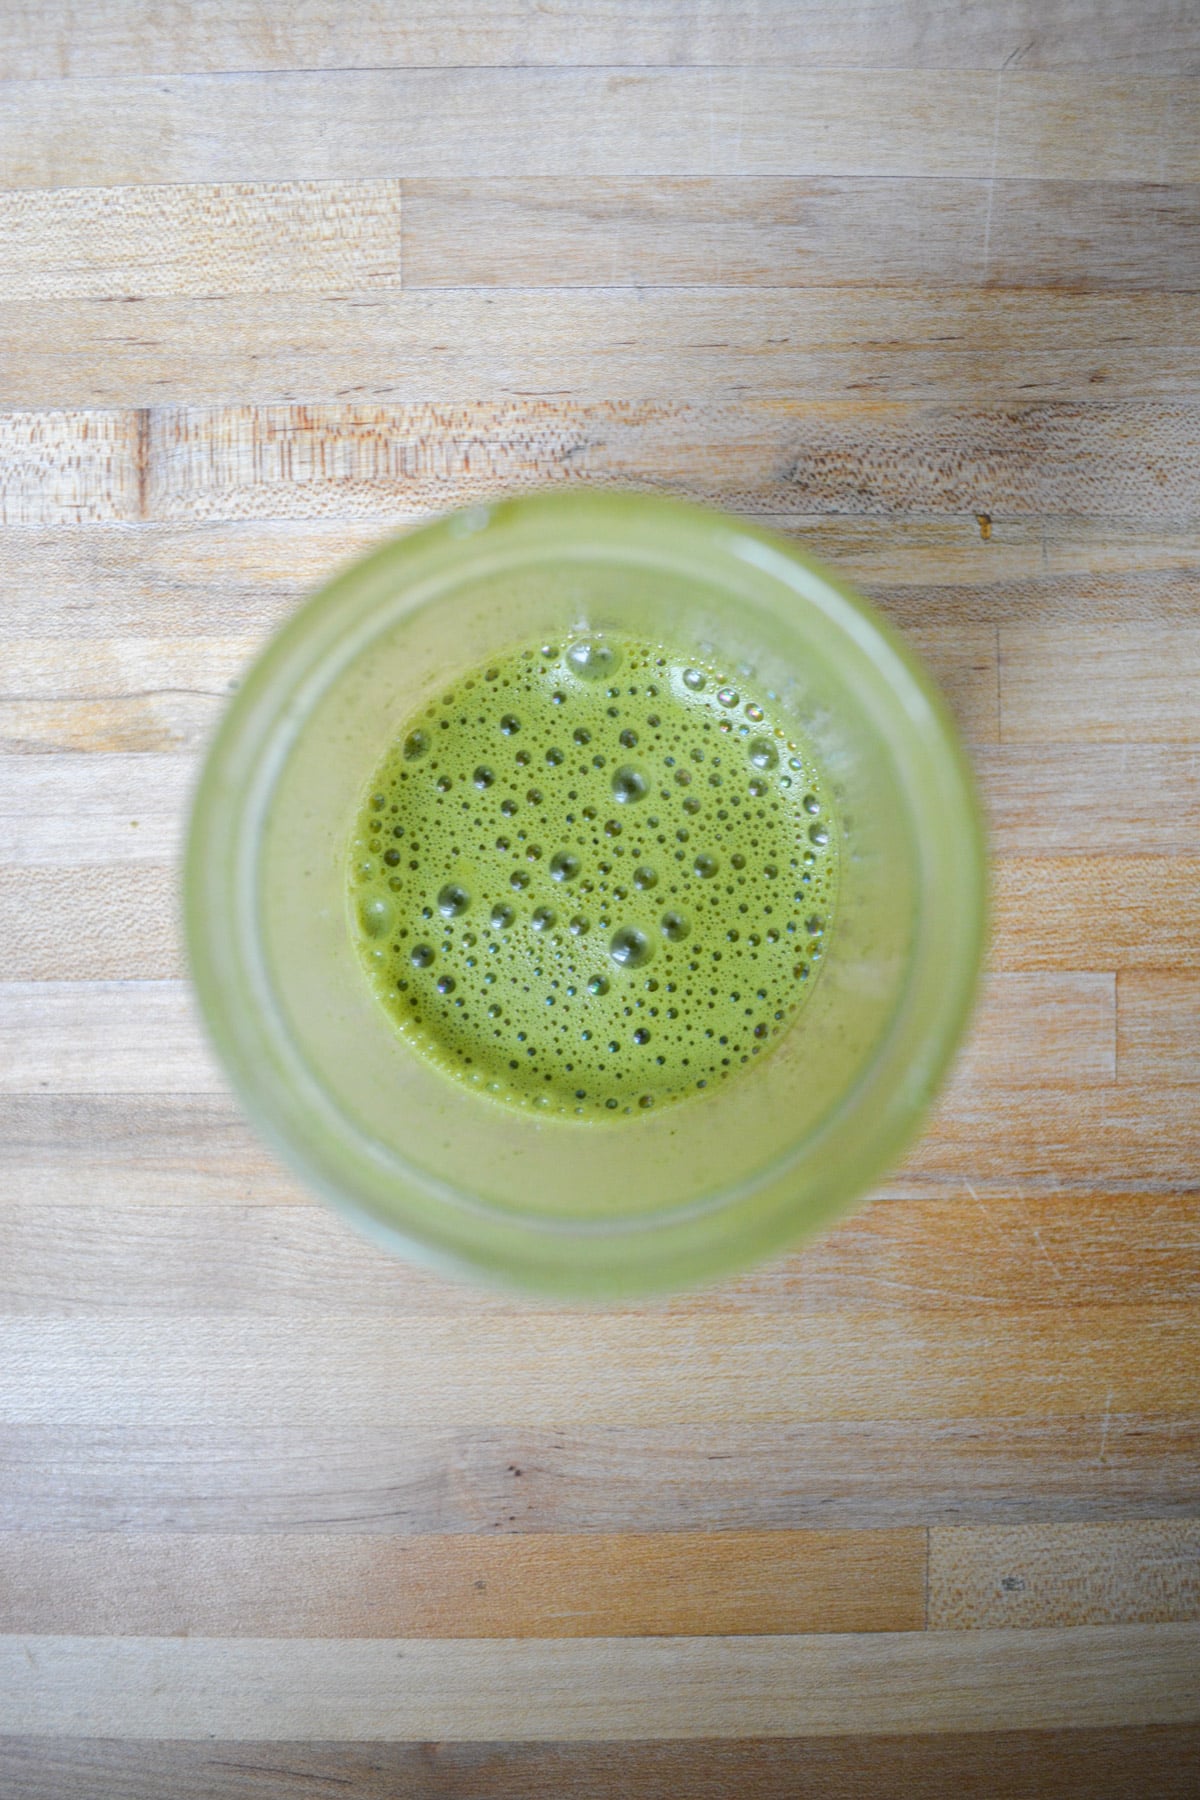 Matcha powder mixed with hot water in a glass jar.